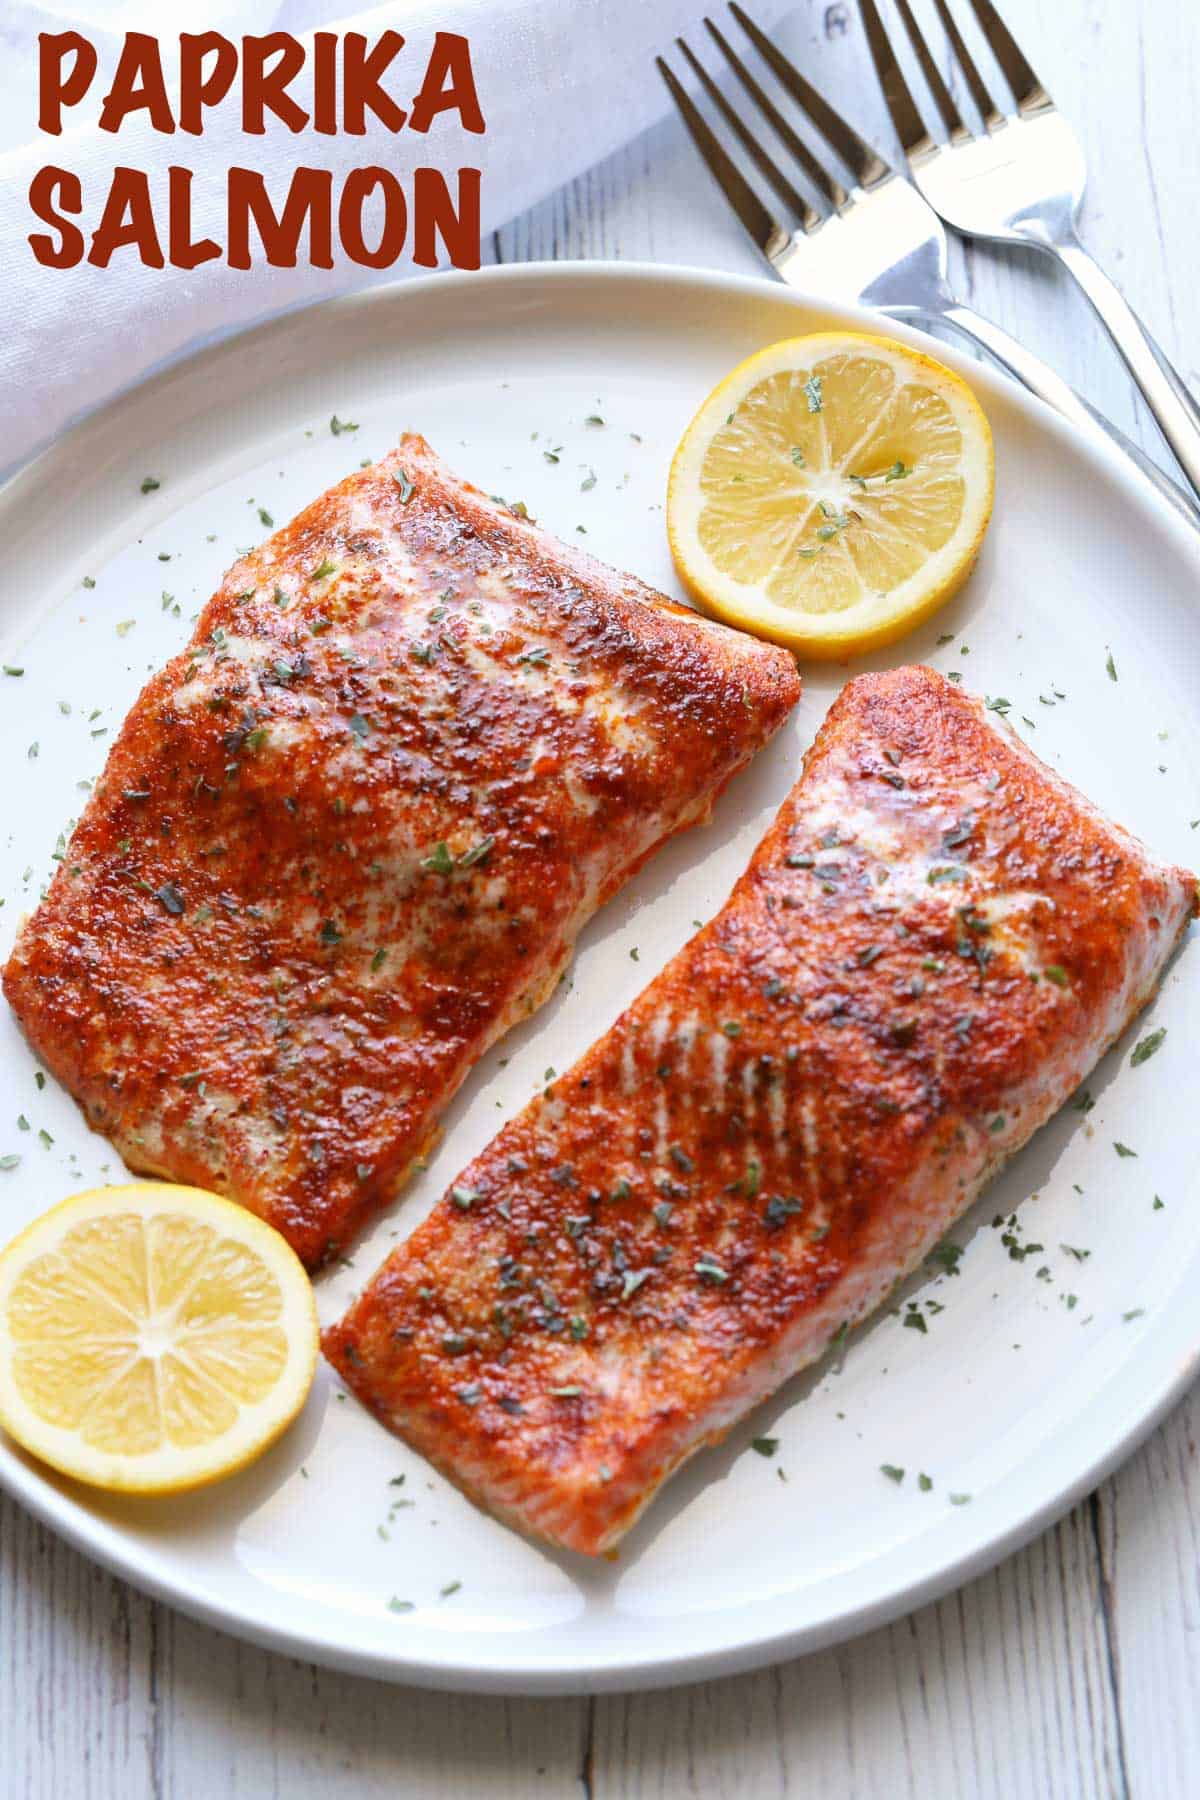 Salmon seasoned with paprika, served on a plate with lemon slices.